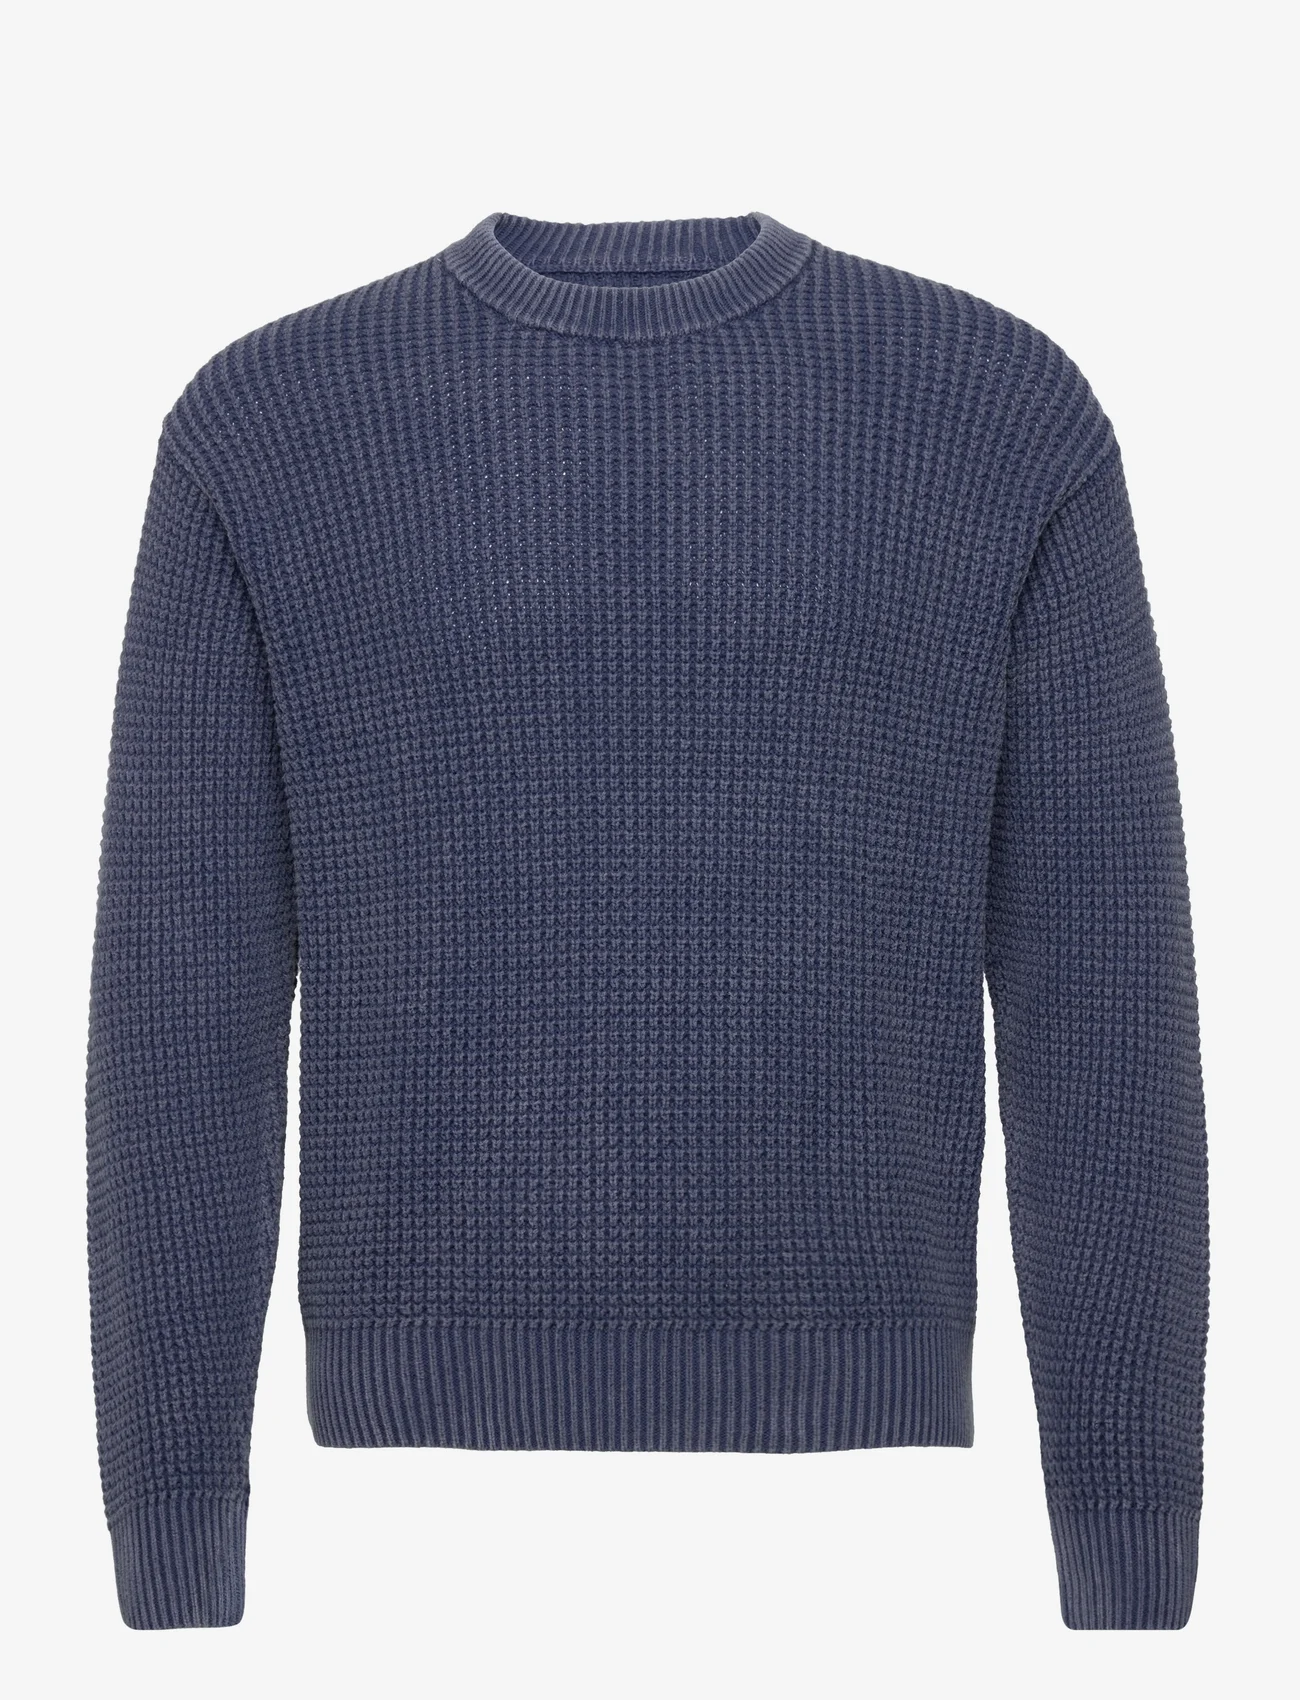 Abercrombie & Fitch - ANF MENS SWEATERS - basic knitwear - navy - 0